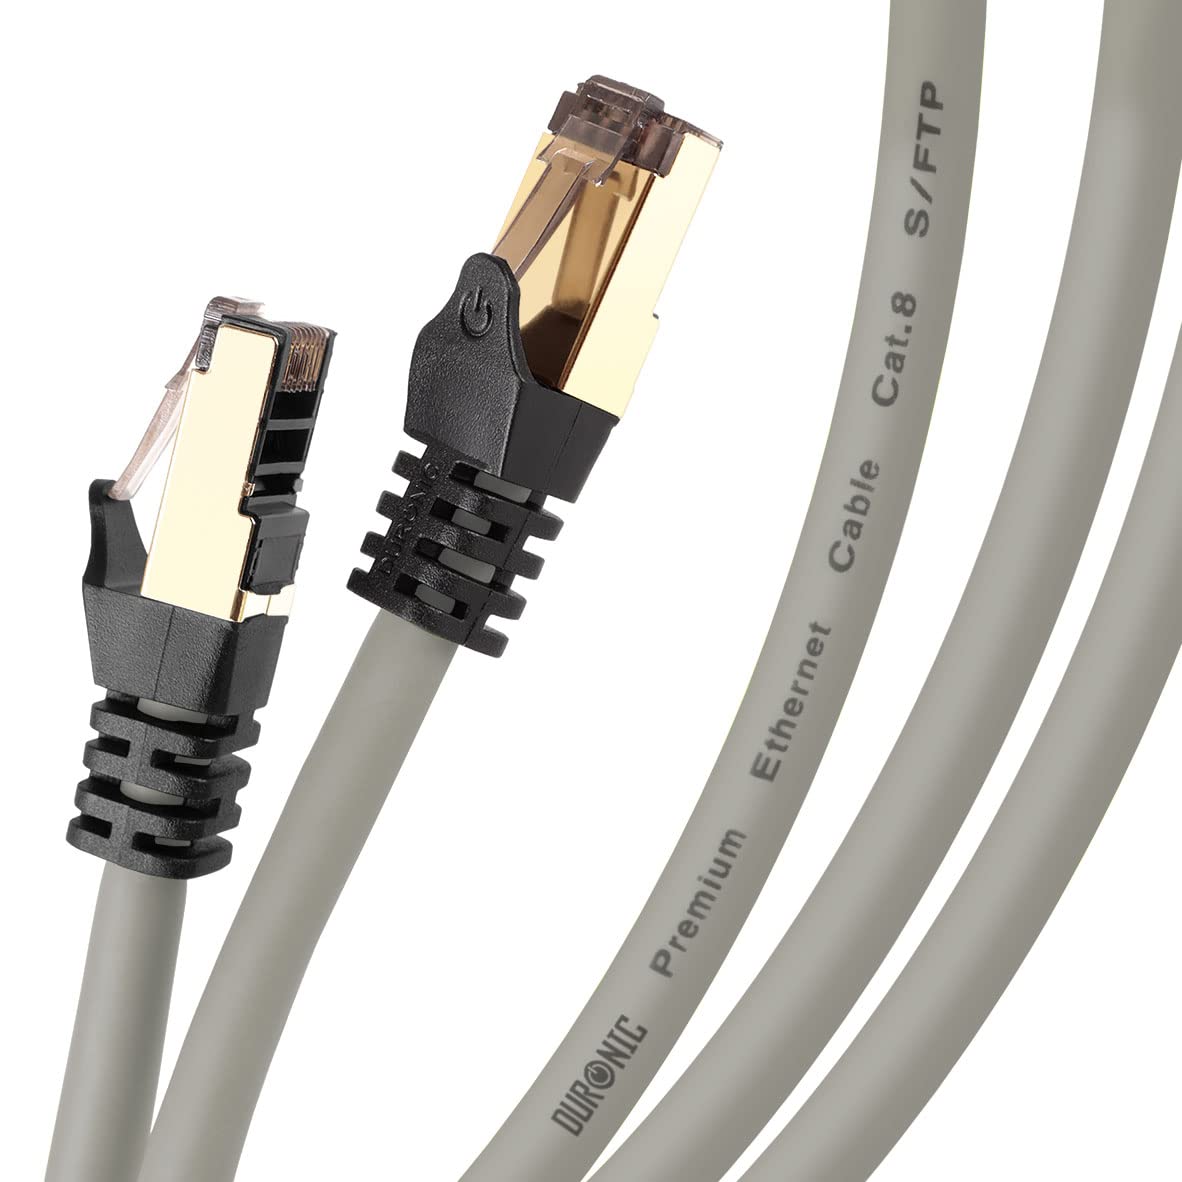 Duronic Ethernet Cable 1M High Speed CAT 8 Patch Network Shielded Lead 2GHz / 2000MHz / 40 Gigabit, CAT8 SFTP Wire, Snagless RJ45 Super-Fast Data - Grey